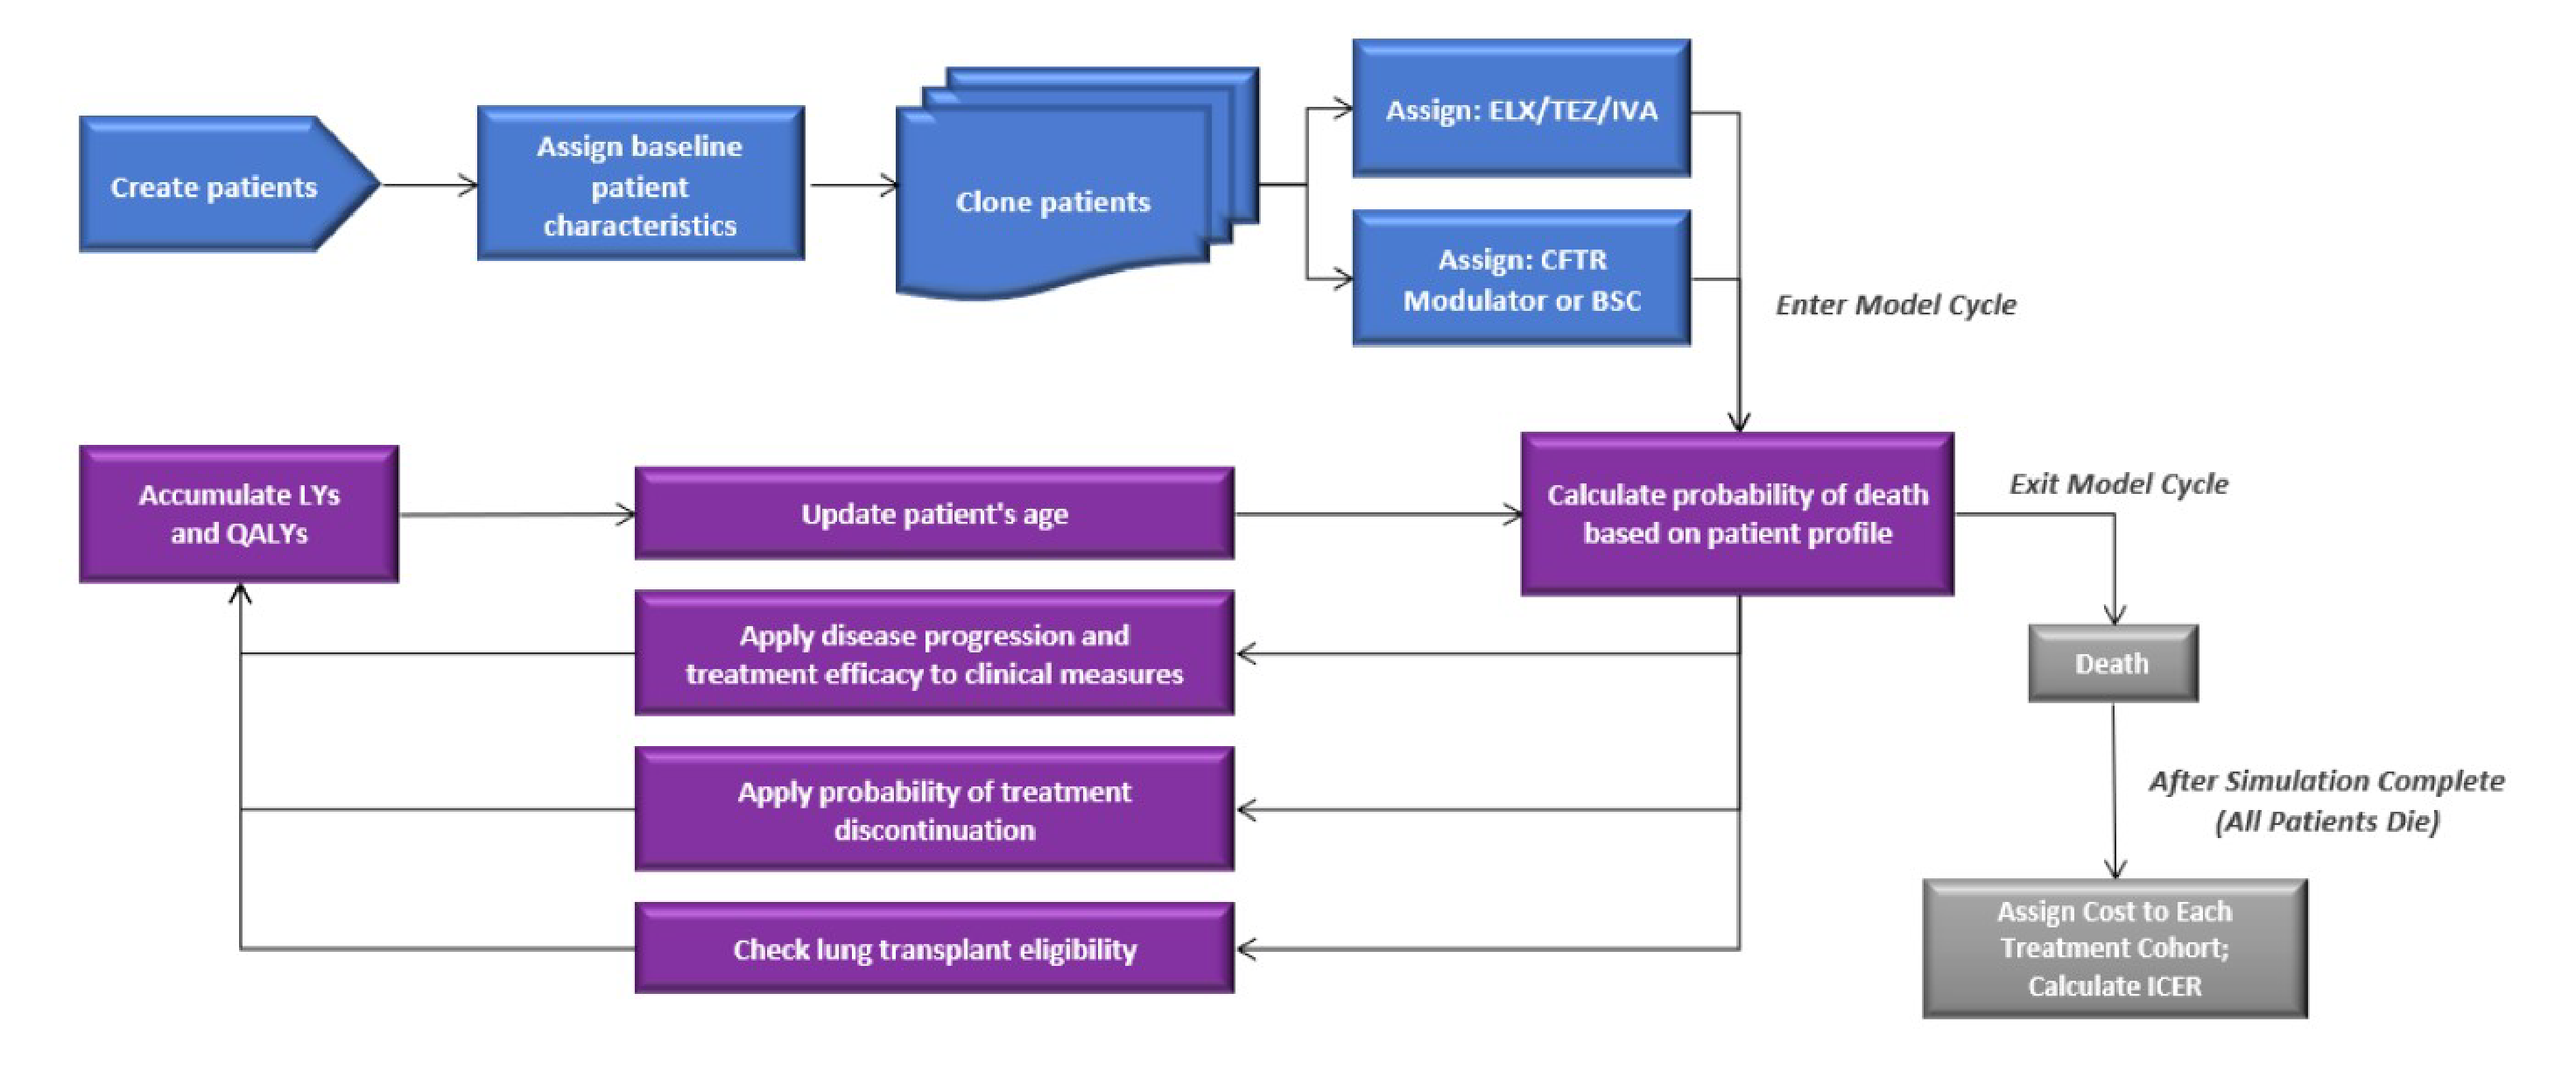 The microsimulation model structure submitted by the sponsor illustrating the flow of patients through different health states.